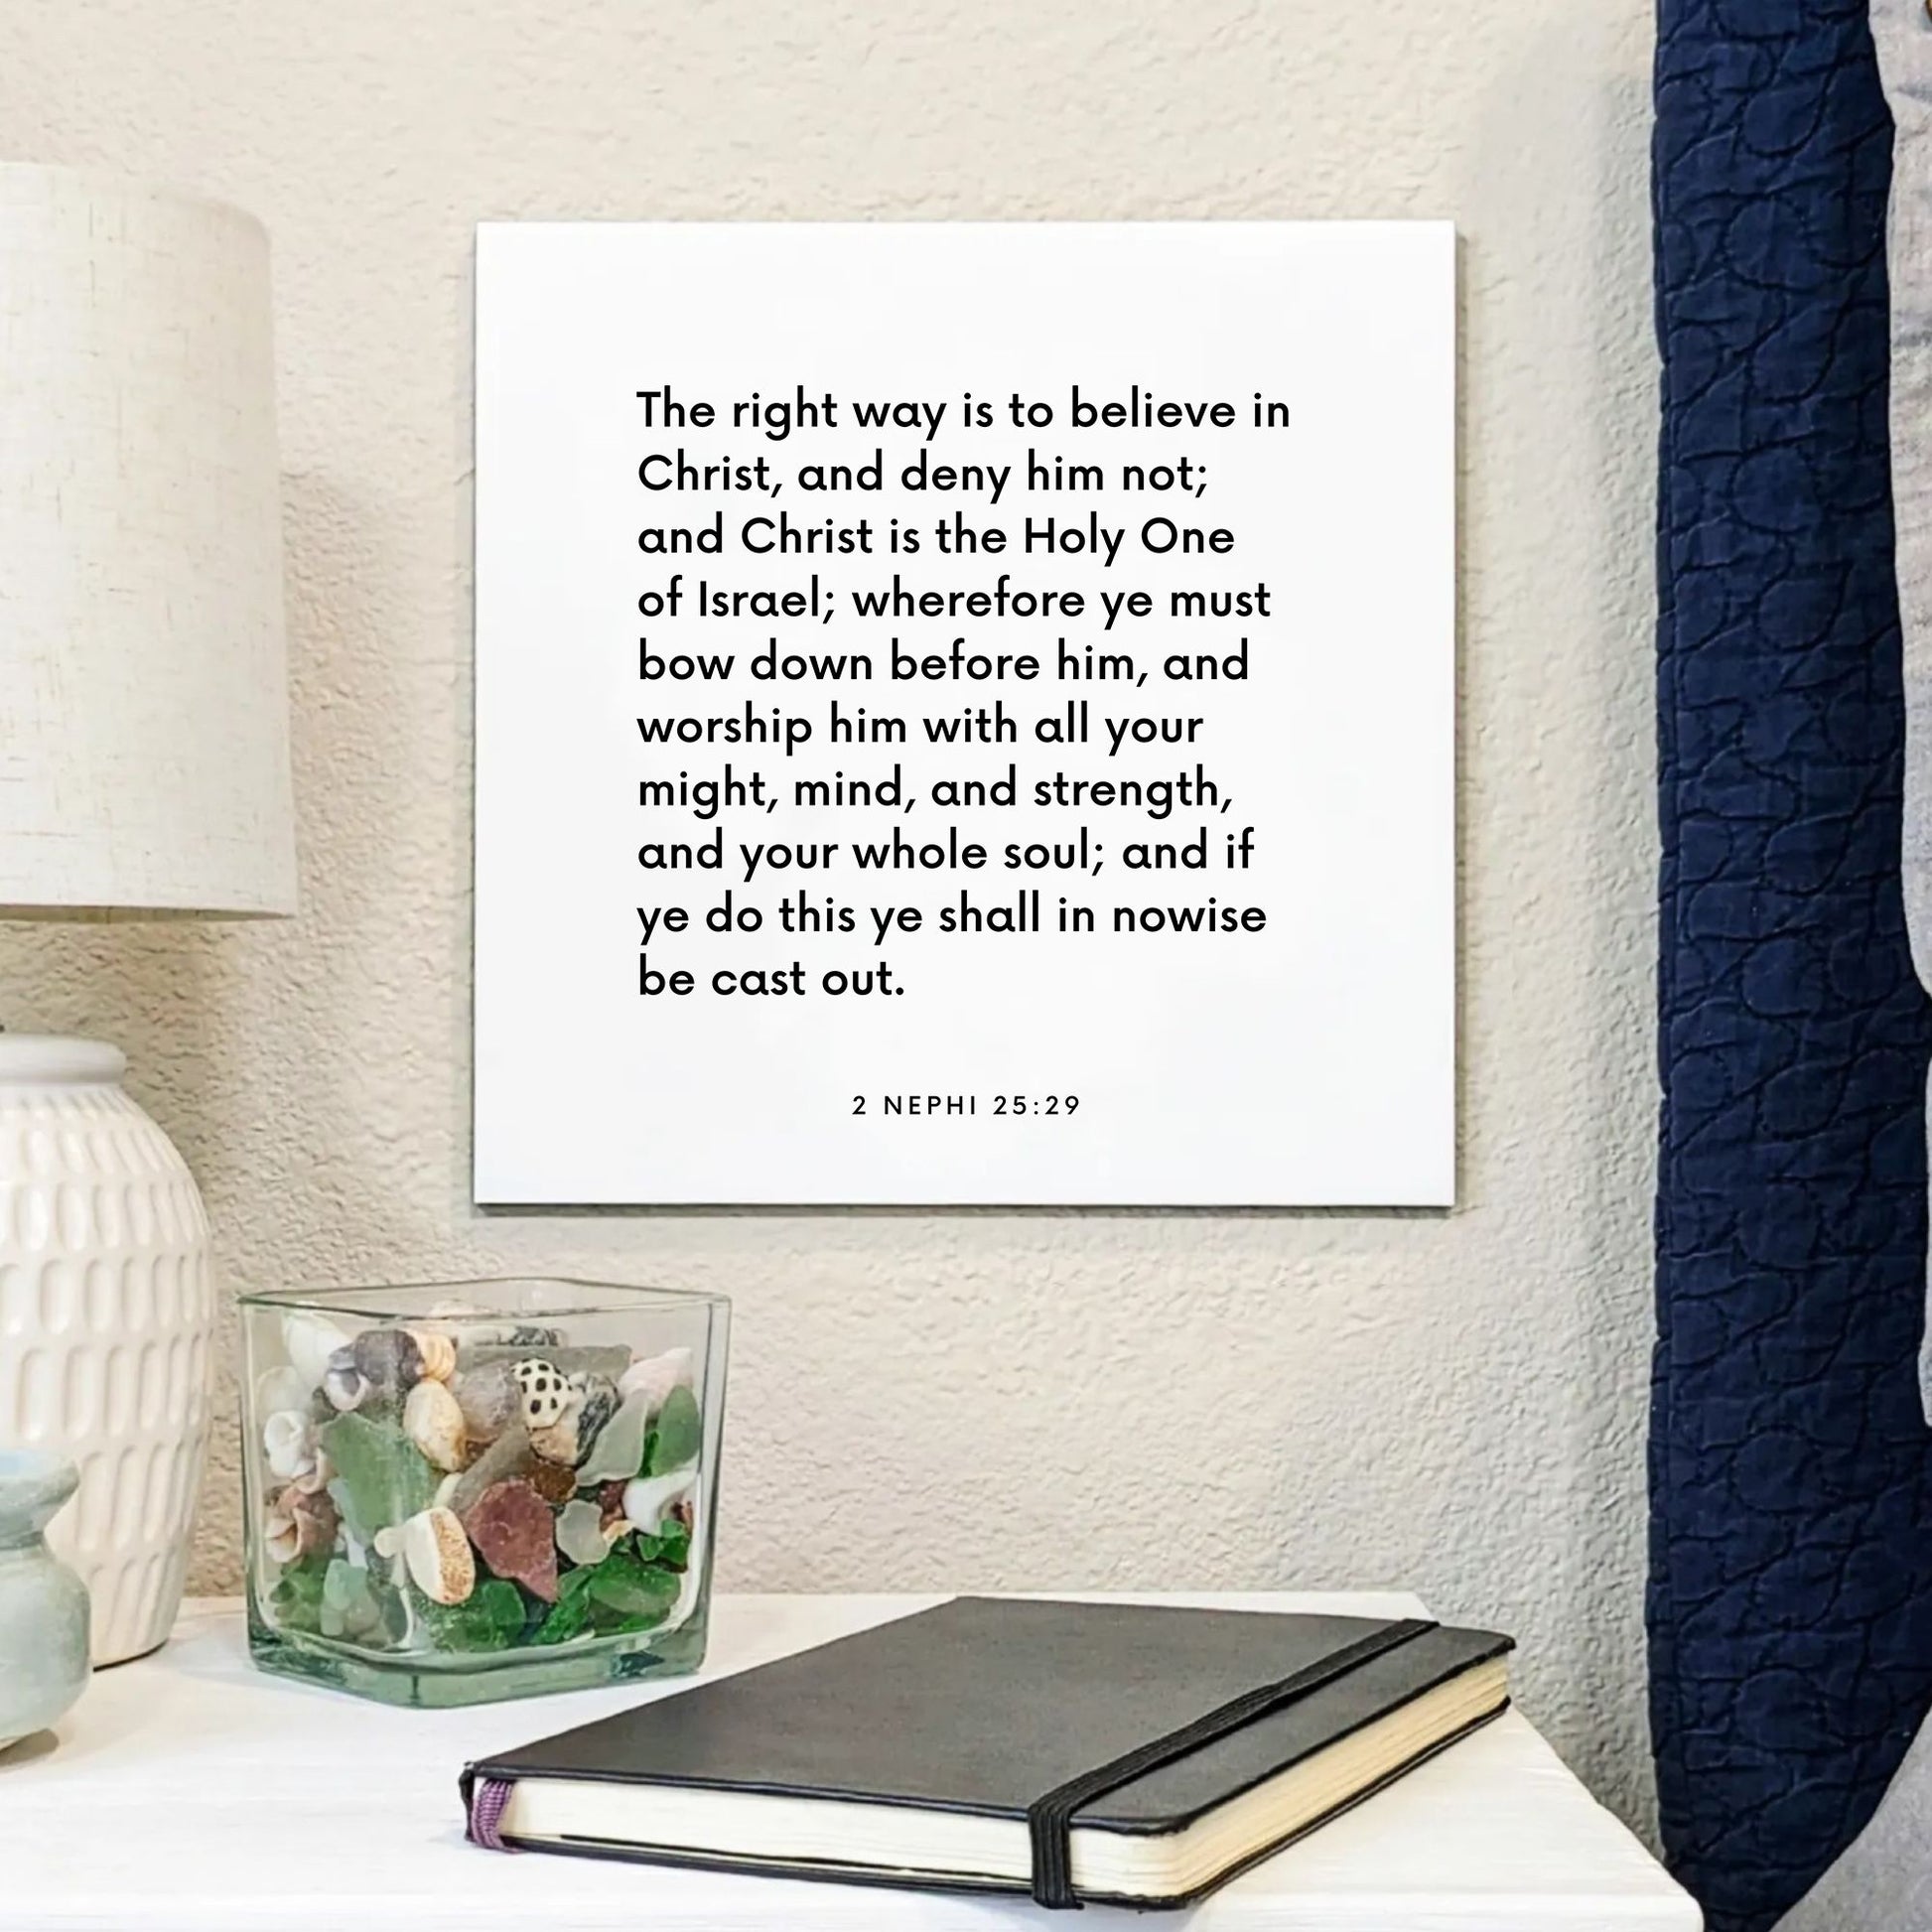 Bedside mouting of the scripture tile for 2 Nephi 25:29 - "The right way is to believe in Christ, and deny him not"